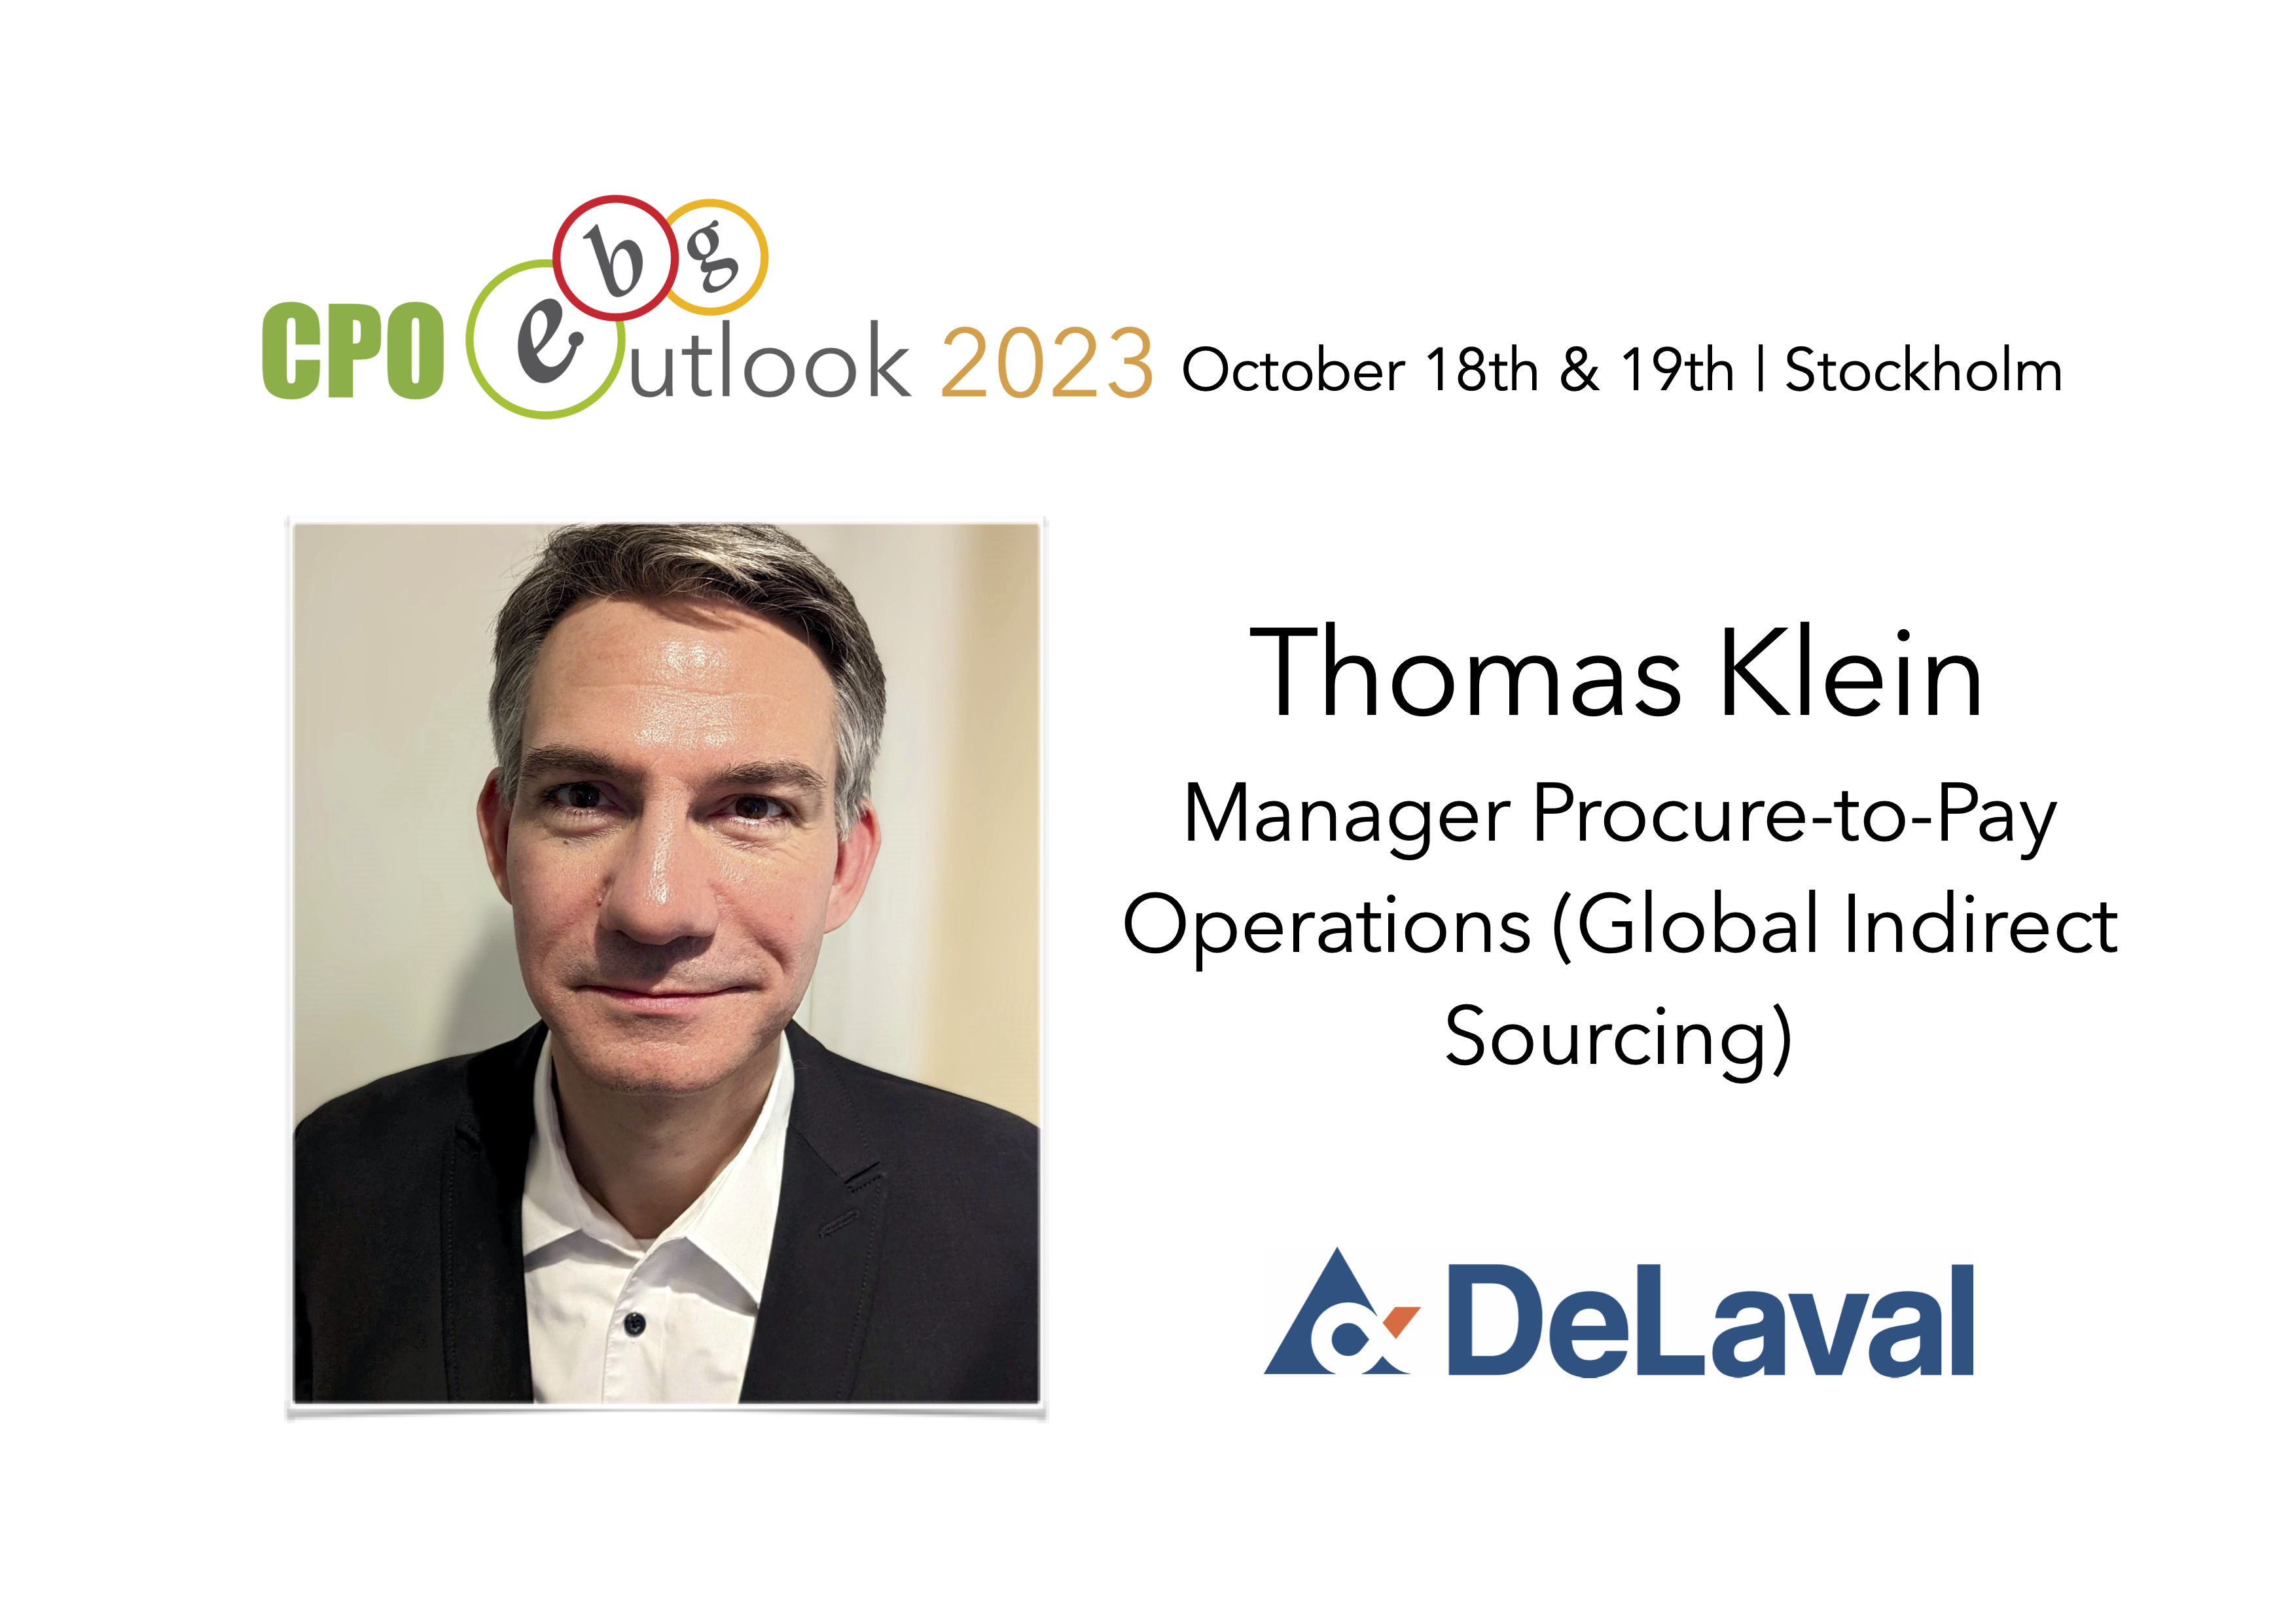 DeLaval join CPO Outlook 202